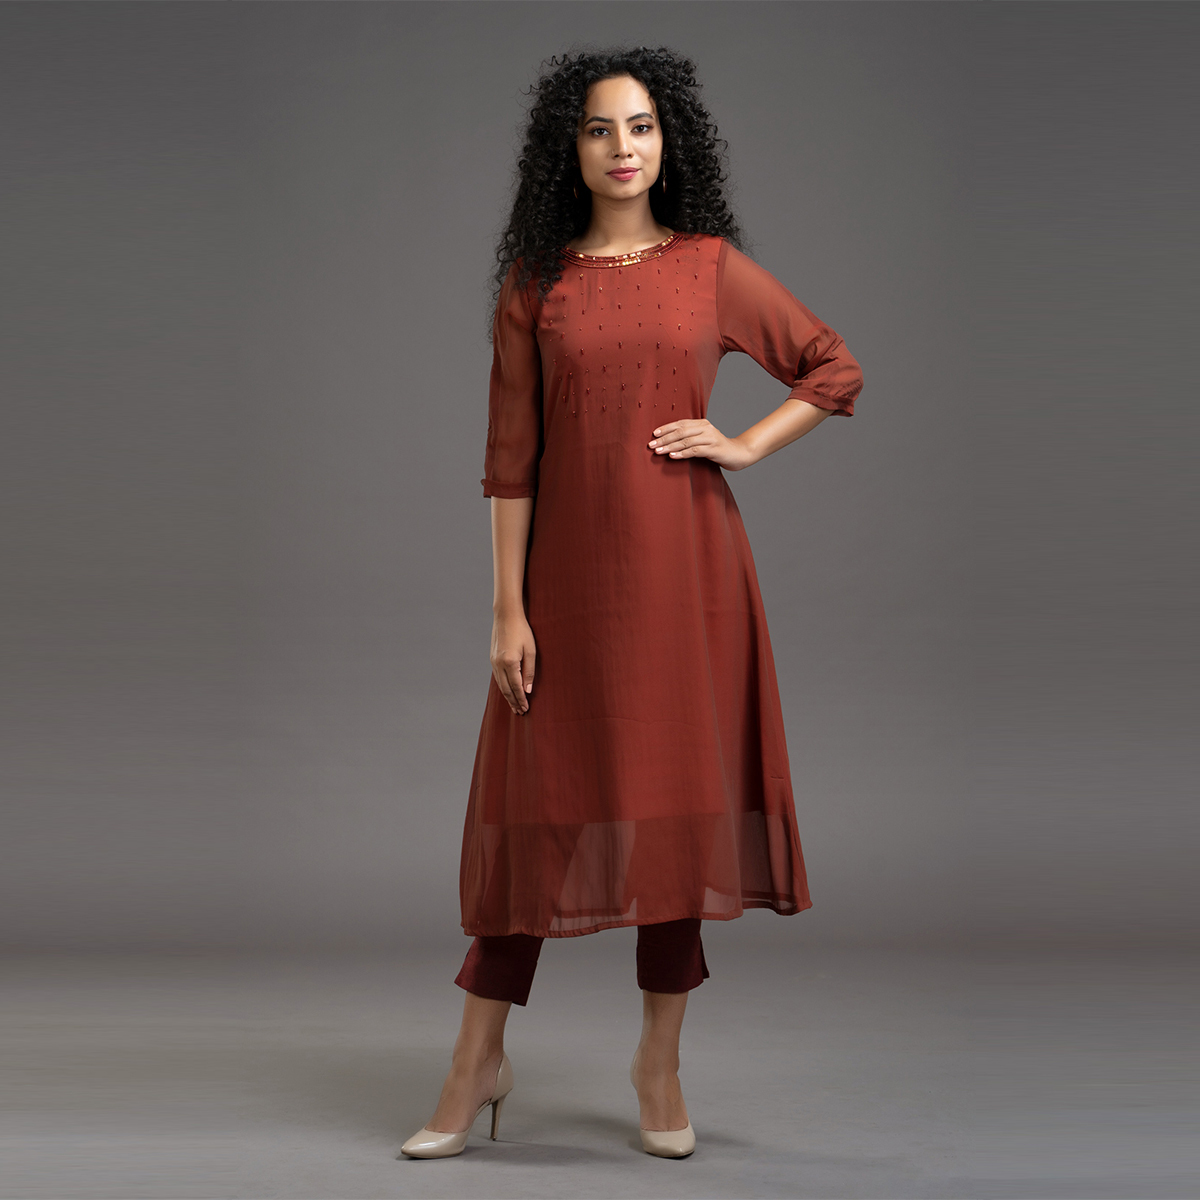 Zella Solid Color Double shaded chiffon A-Line kurta with embellished crew neck - Maroon